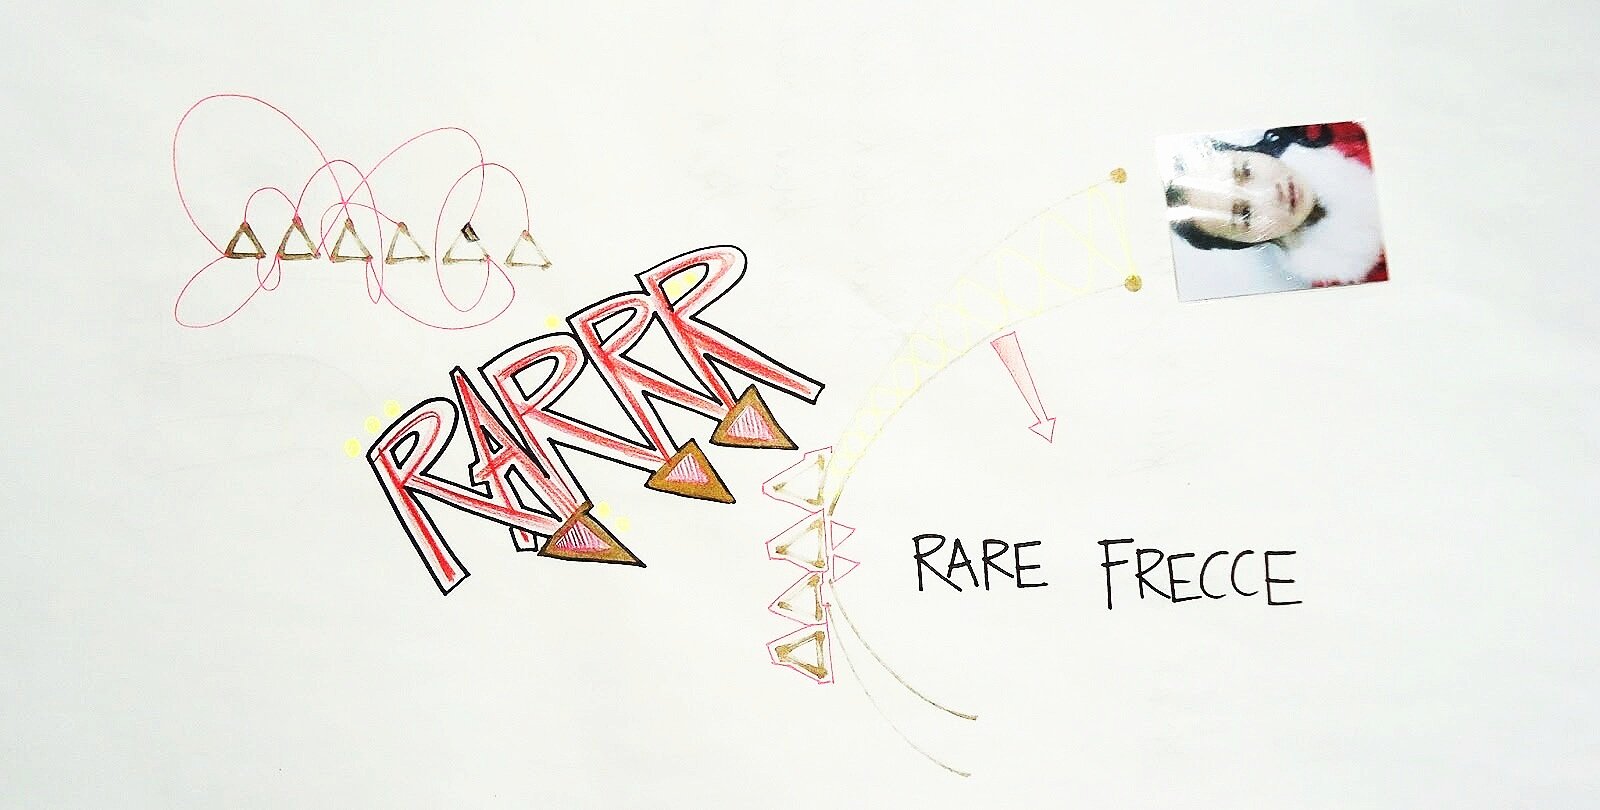 "Rare Arrows", 2013, drawing with found object, 80x30cm